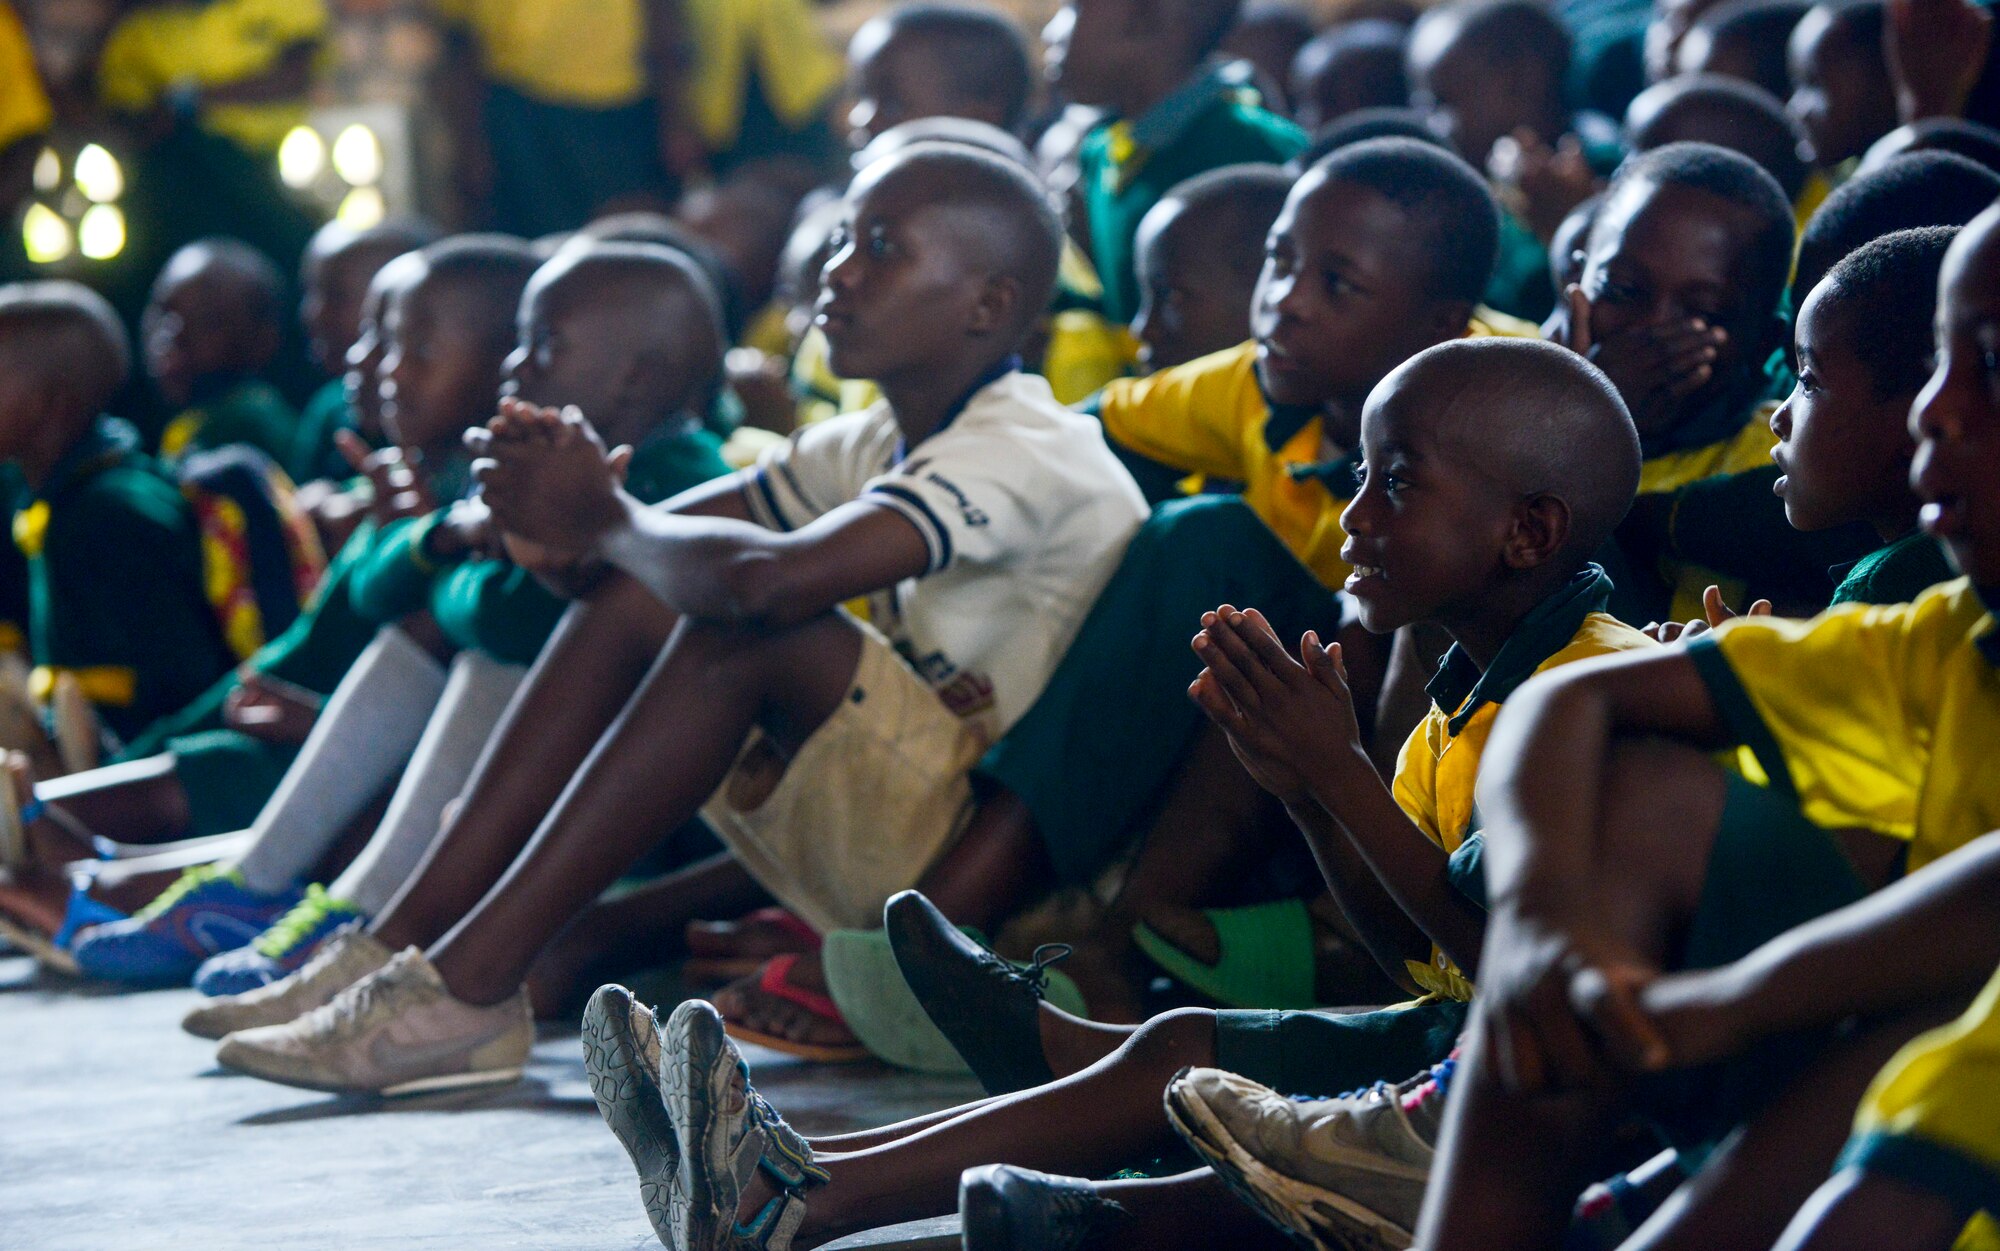 Students of the Home de la vierge des Pauvres Gatagara/Nyanza listen to music played by the U.S. Air Forces in Europe Band Touch N' Go in the Nyanza District, Rwanda, March 5, 2019. The USAFE Band played for HVP Nyanza as part of an outreach event. The band uses these events to further increase cultural ties and enhance the people-to-people relationship between the United States and its partners such as Rwanda. (U.S. Air Forces photo by Tech. Sgt. Timothy Moore)